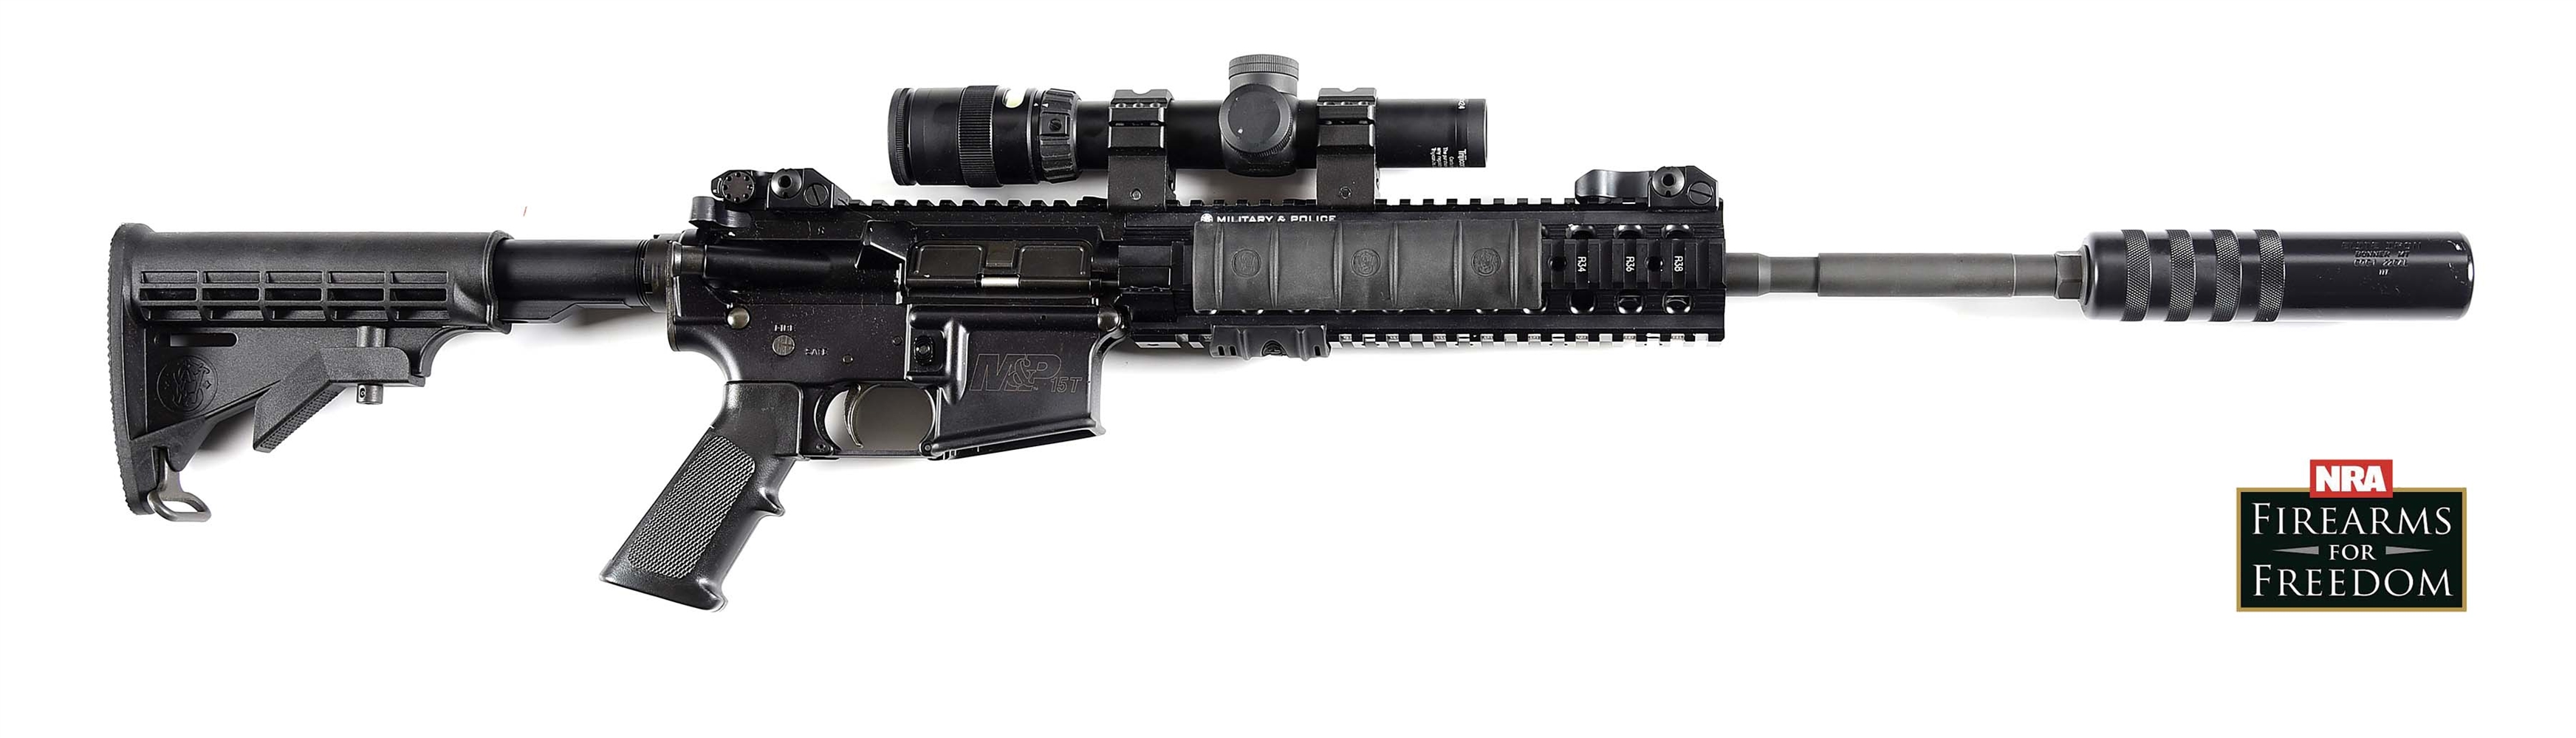 (N) SMITH & WESSON M&P-15 SEMI-AUTOMATIC RIFLE WITH ELITE IRON CQC1 SILENCER (SILENCER).